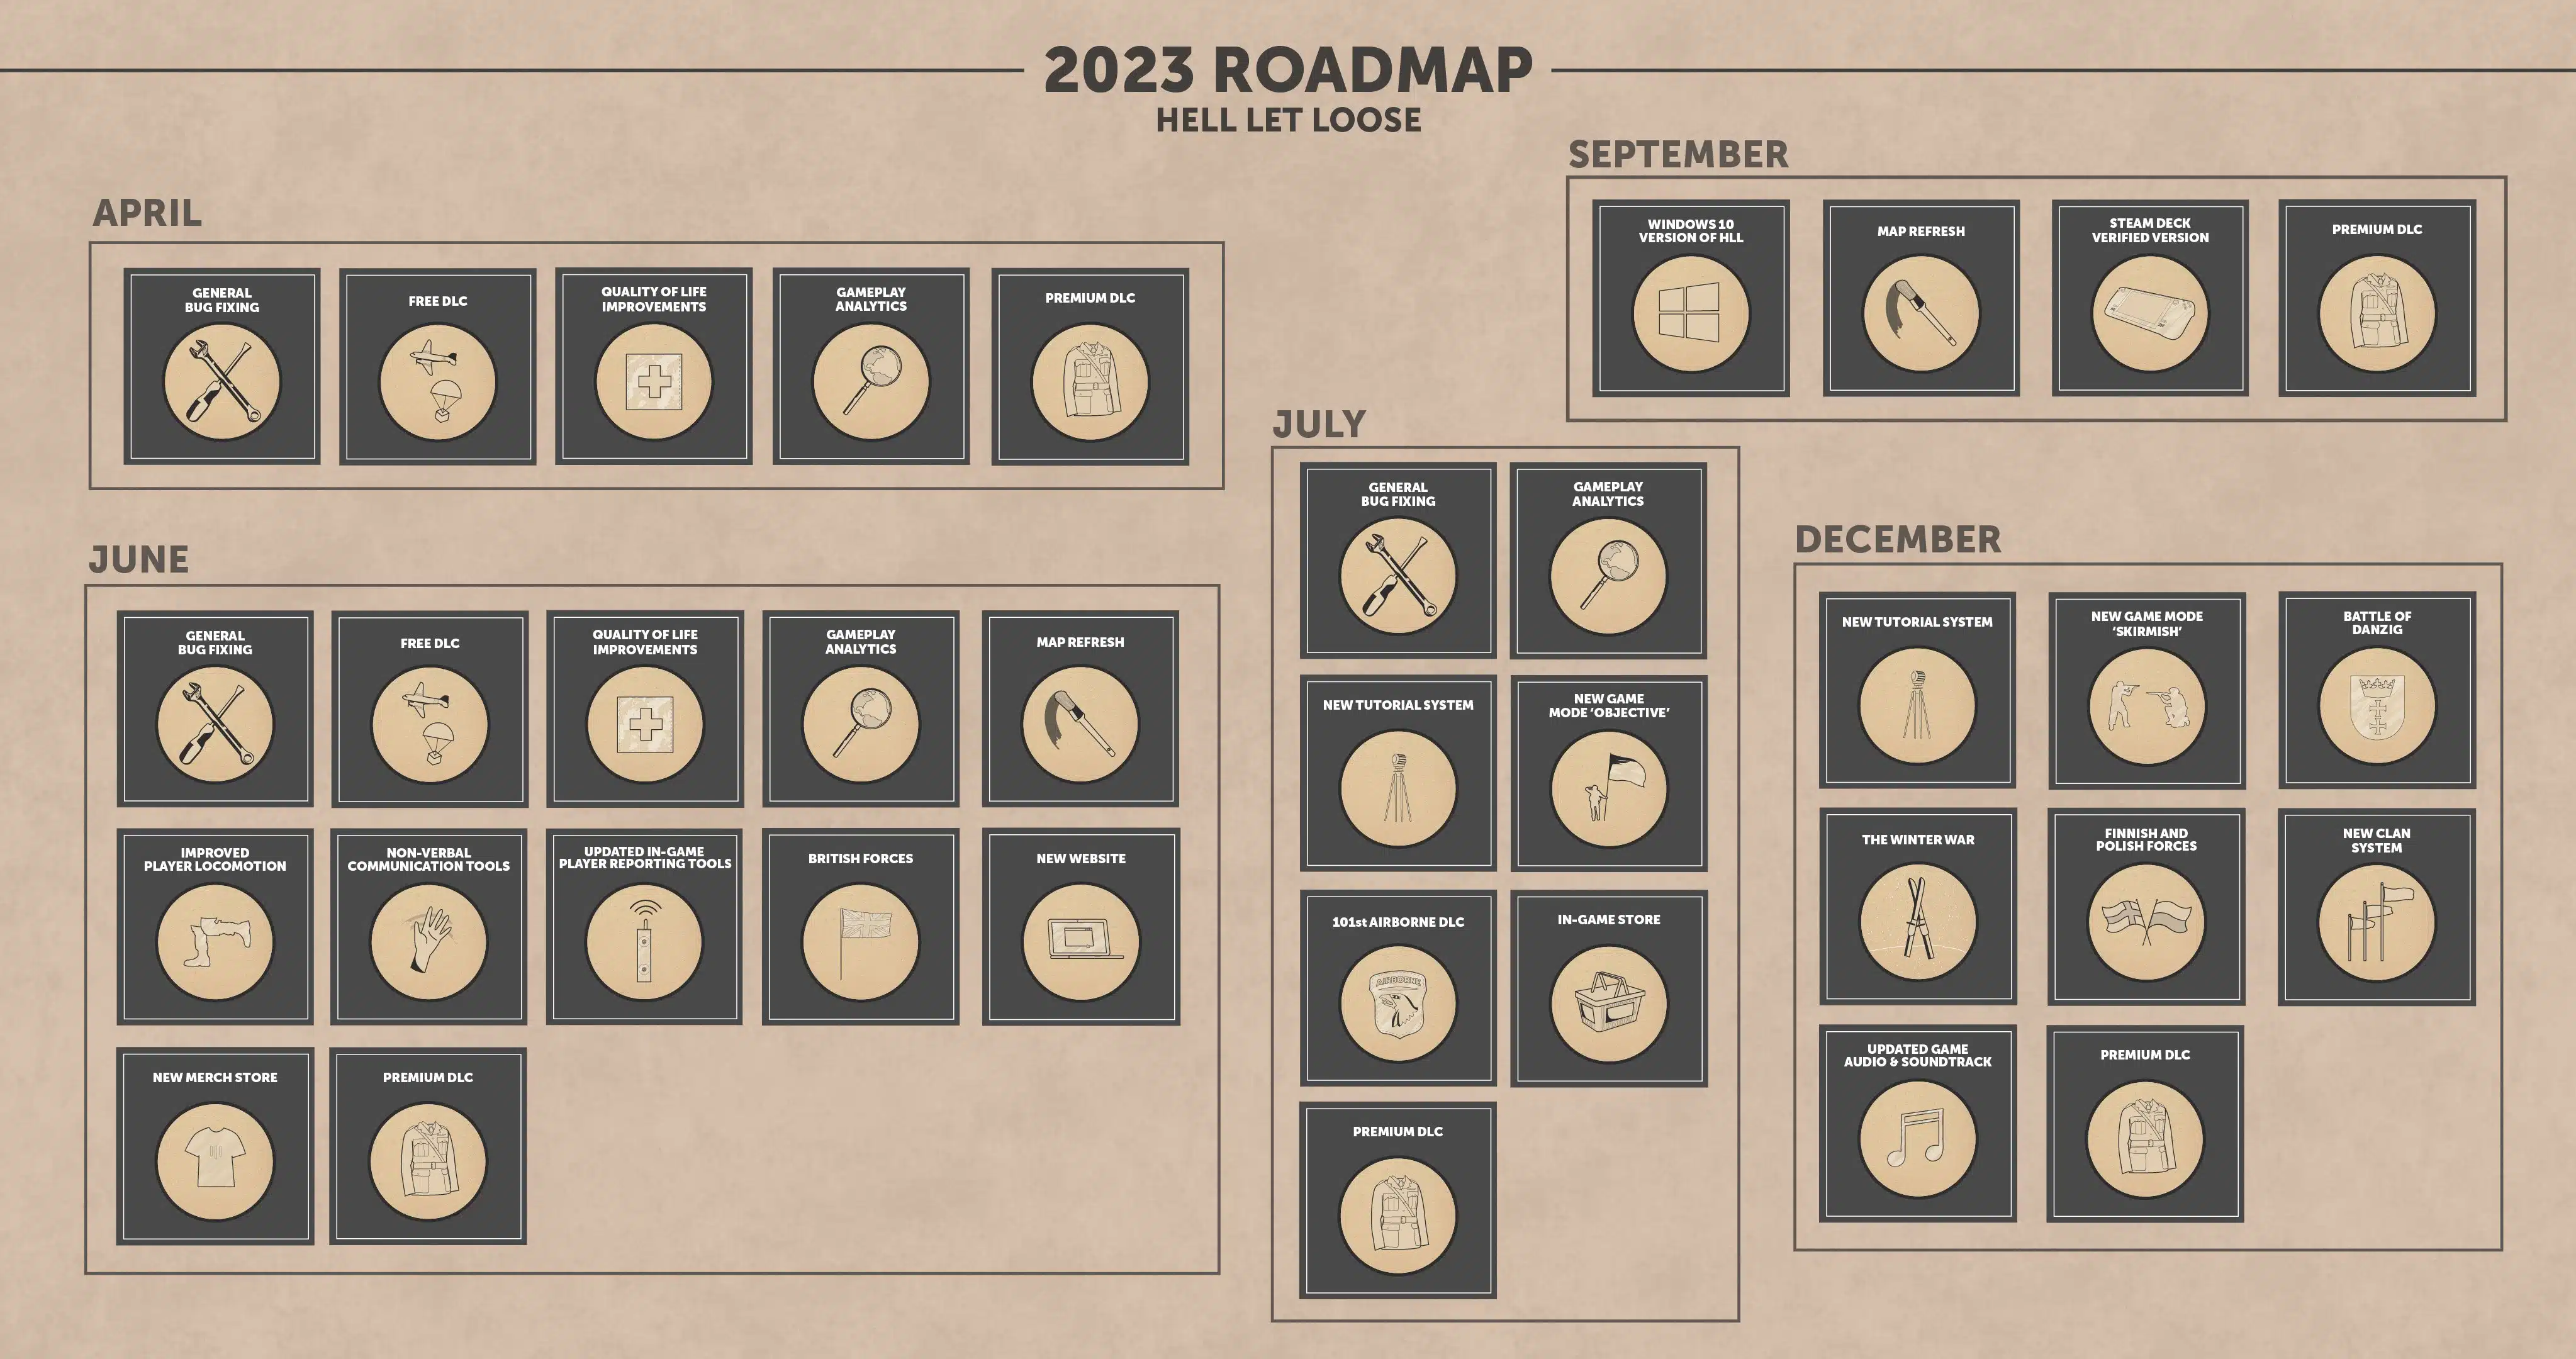 hell let loose roadmap for 2023